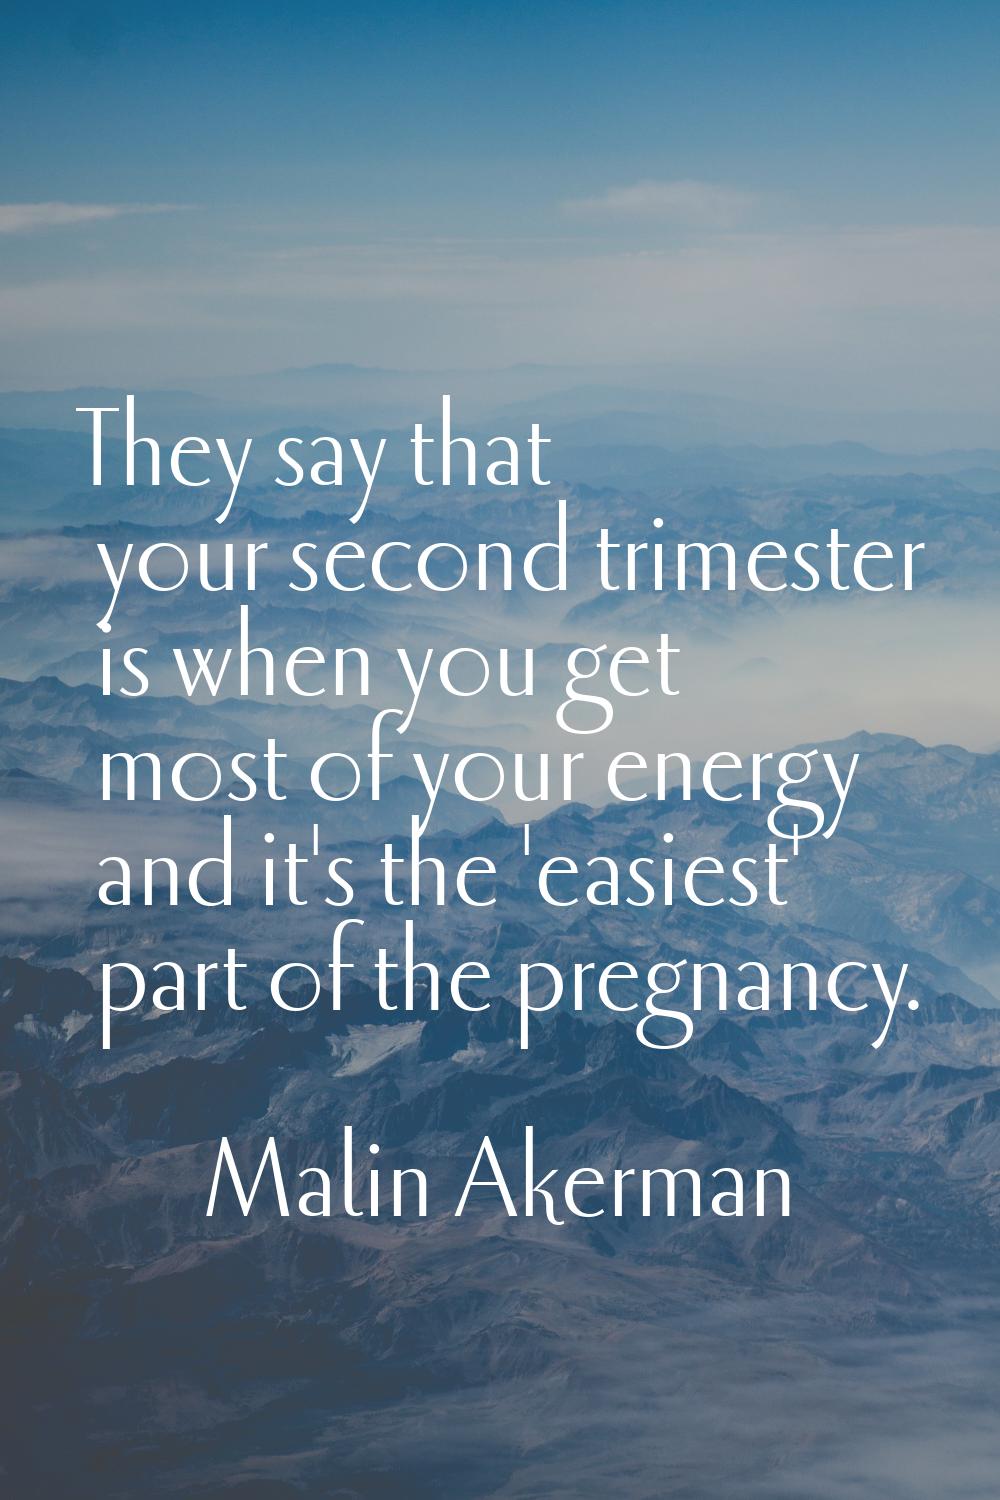 They say that your second trimester is when you get most of your energy and it's the 'easiest' part